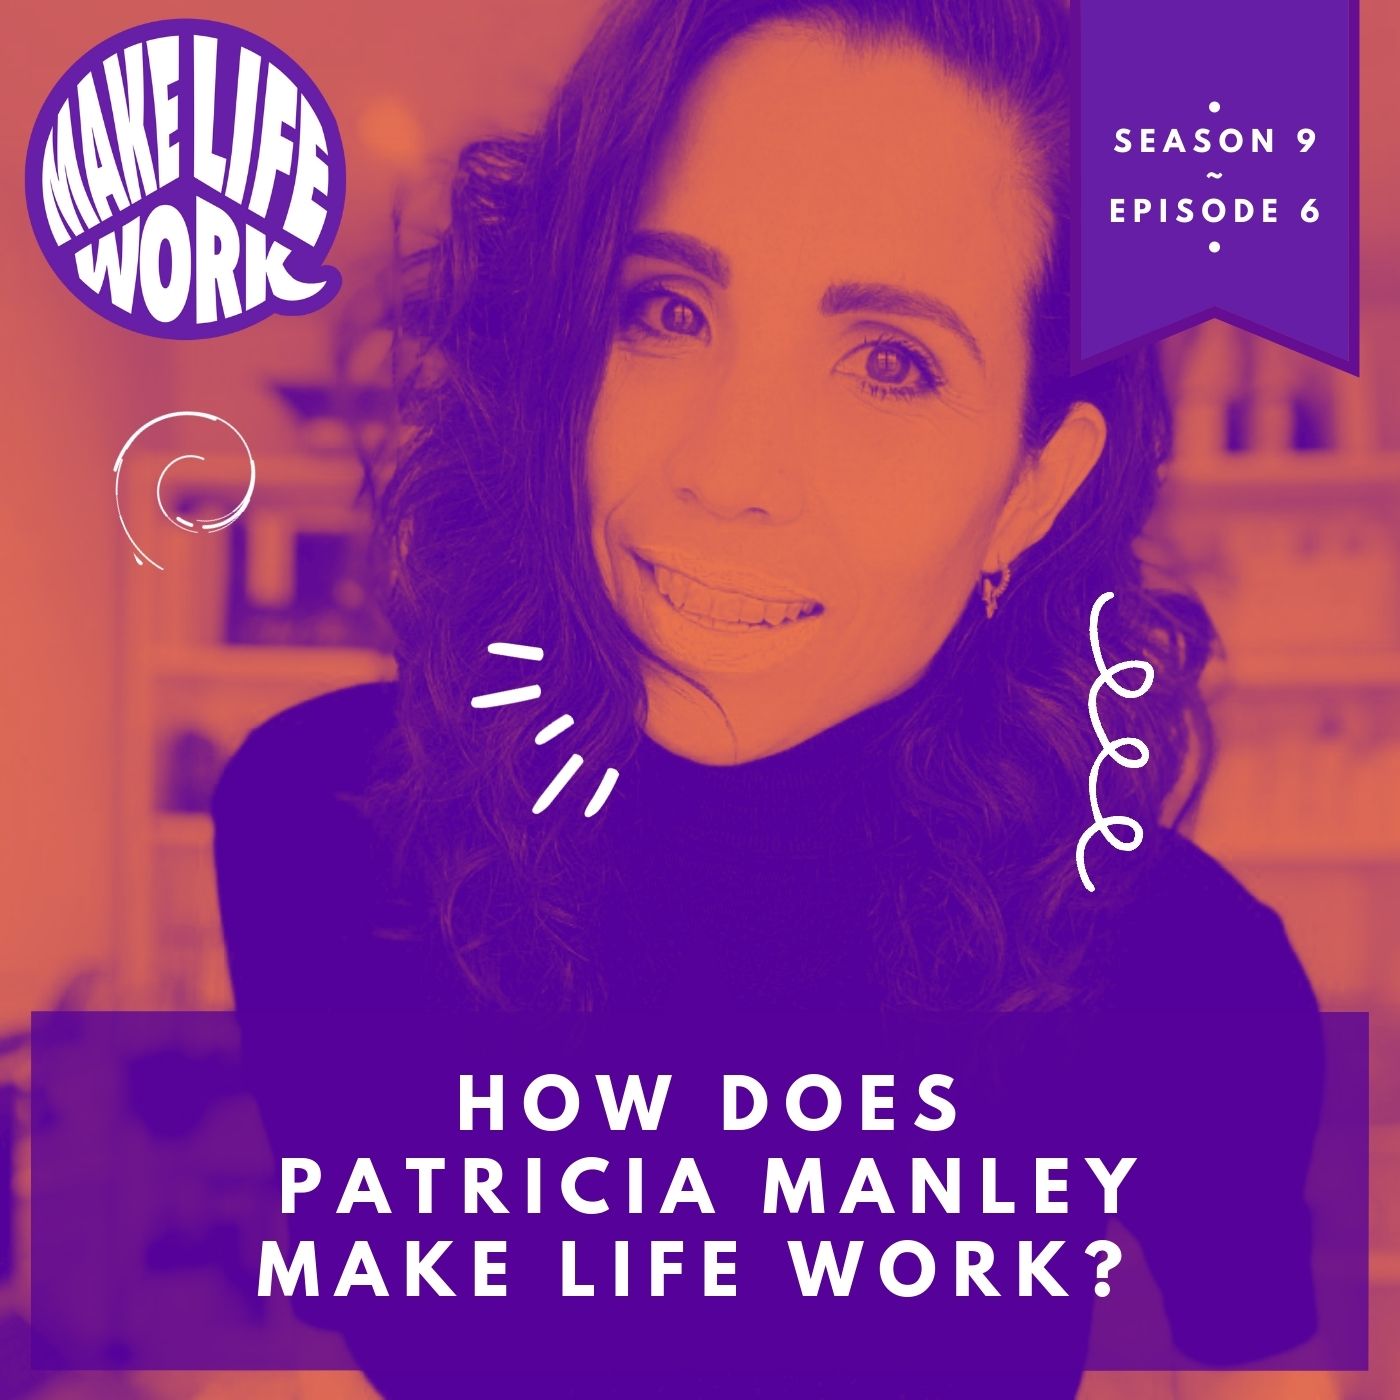 How does Patricia Manley make life work?